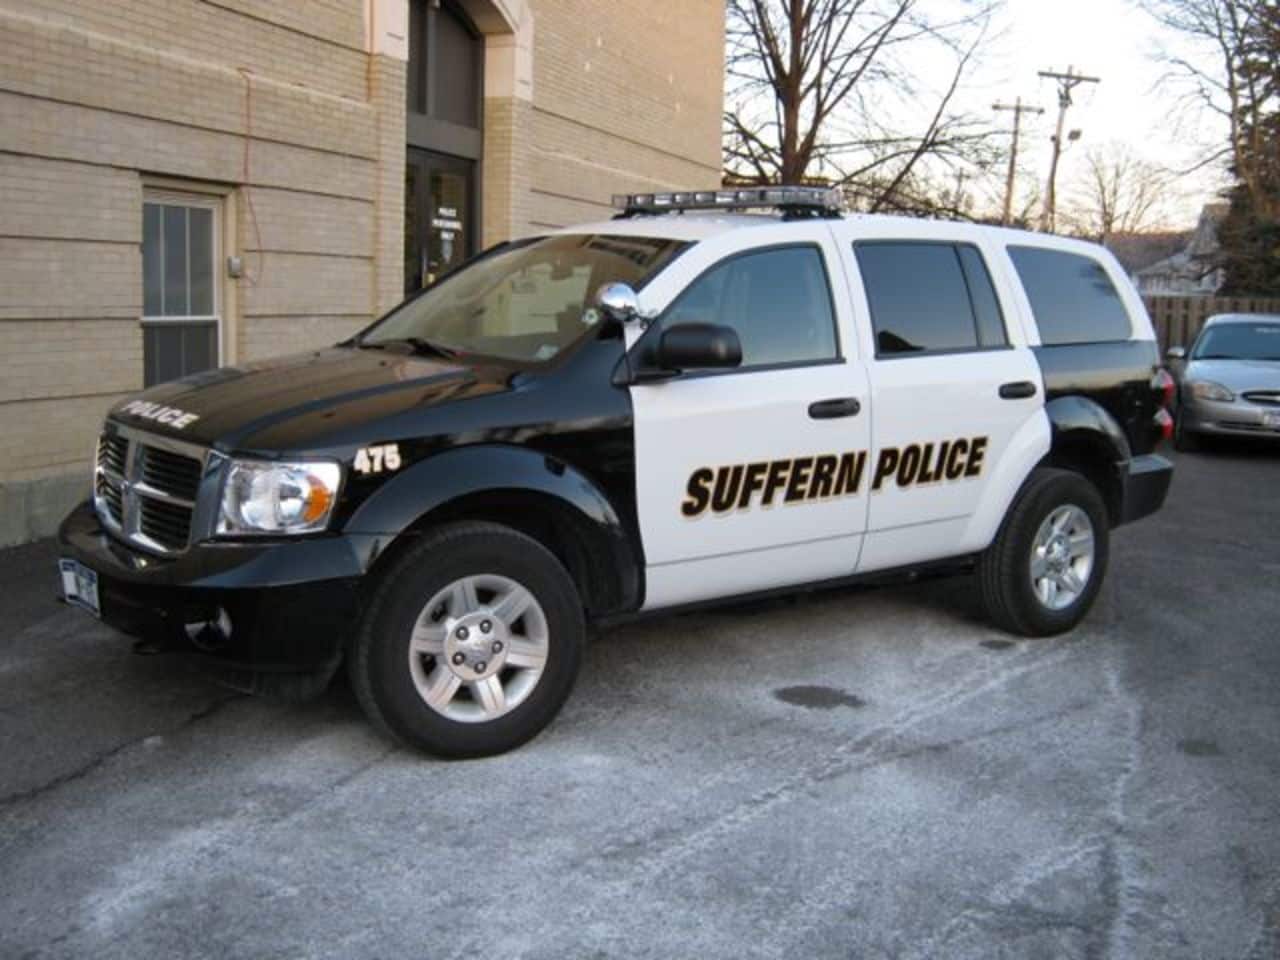 Suffern police say they have arrested a 24-year-old local man and charged him with assault springing from a dispute with his roommate.